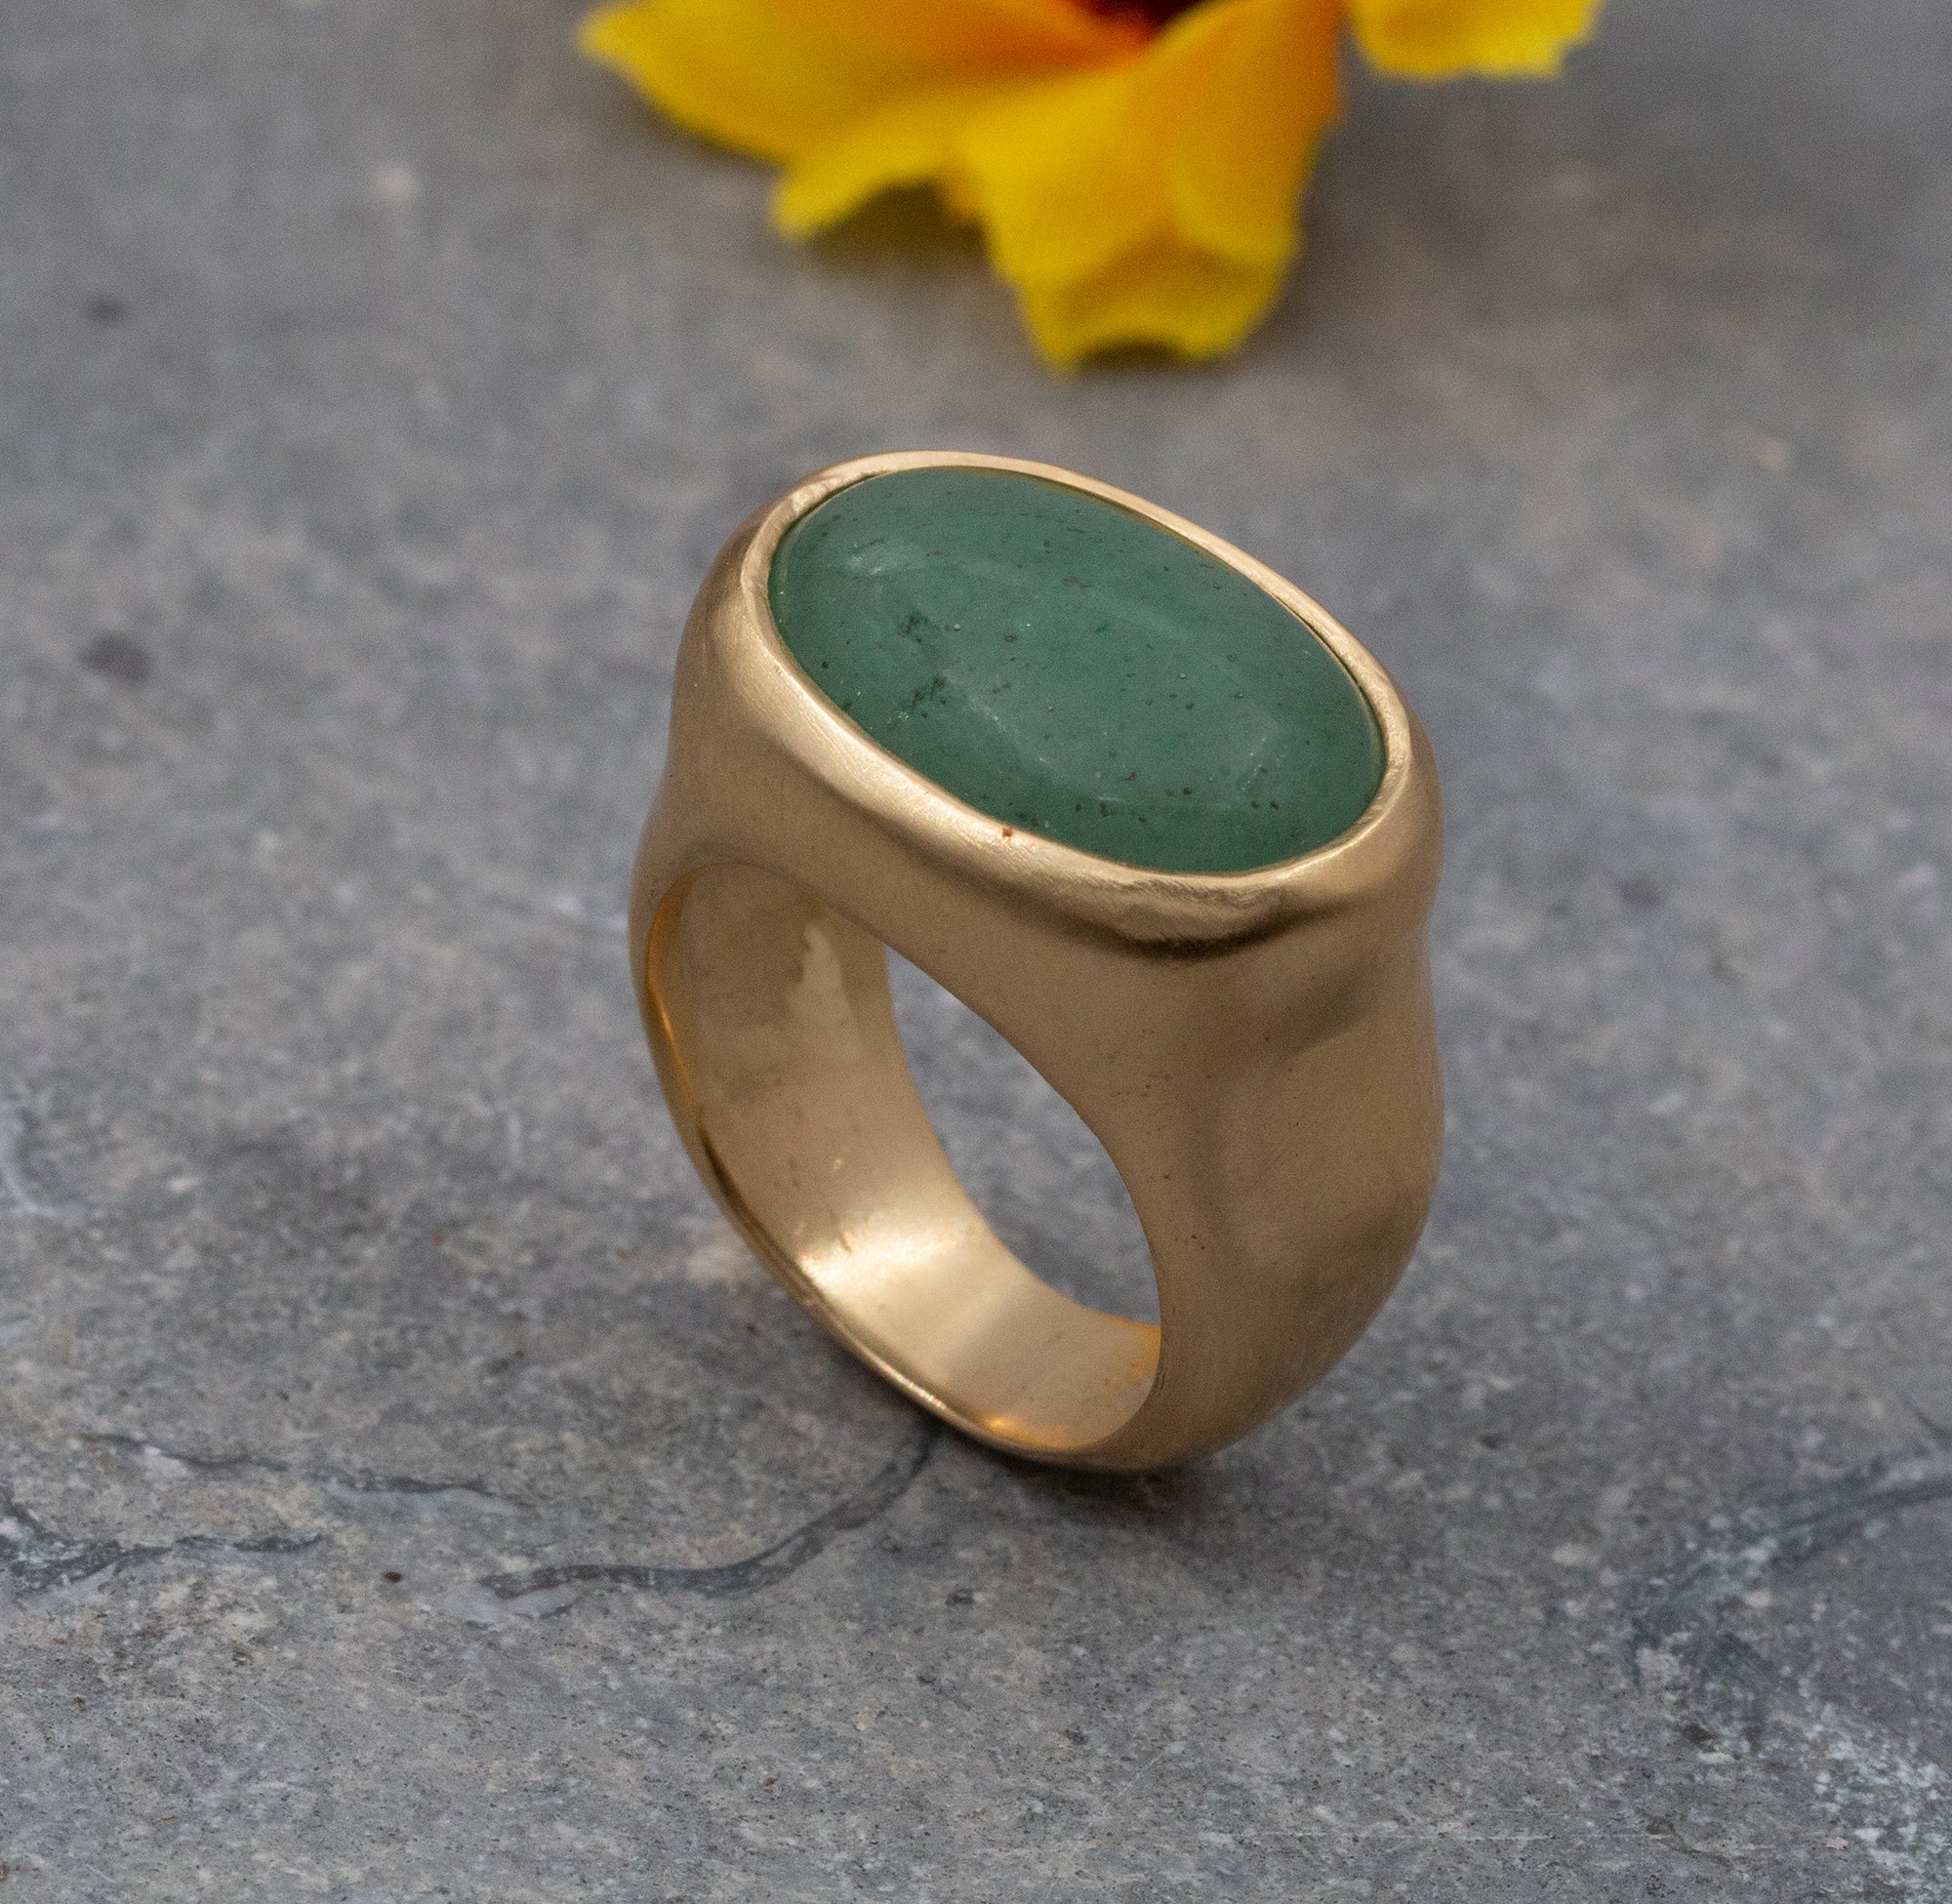 Green Stone Finger Ring - South India Jewels - Online Shop